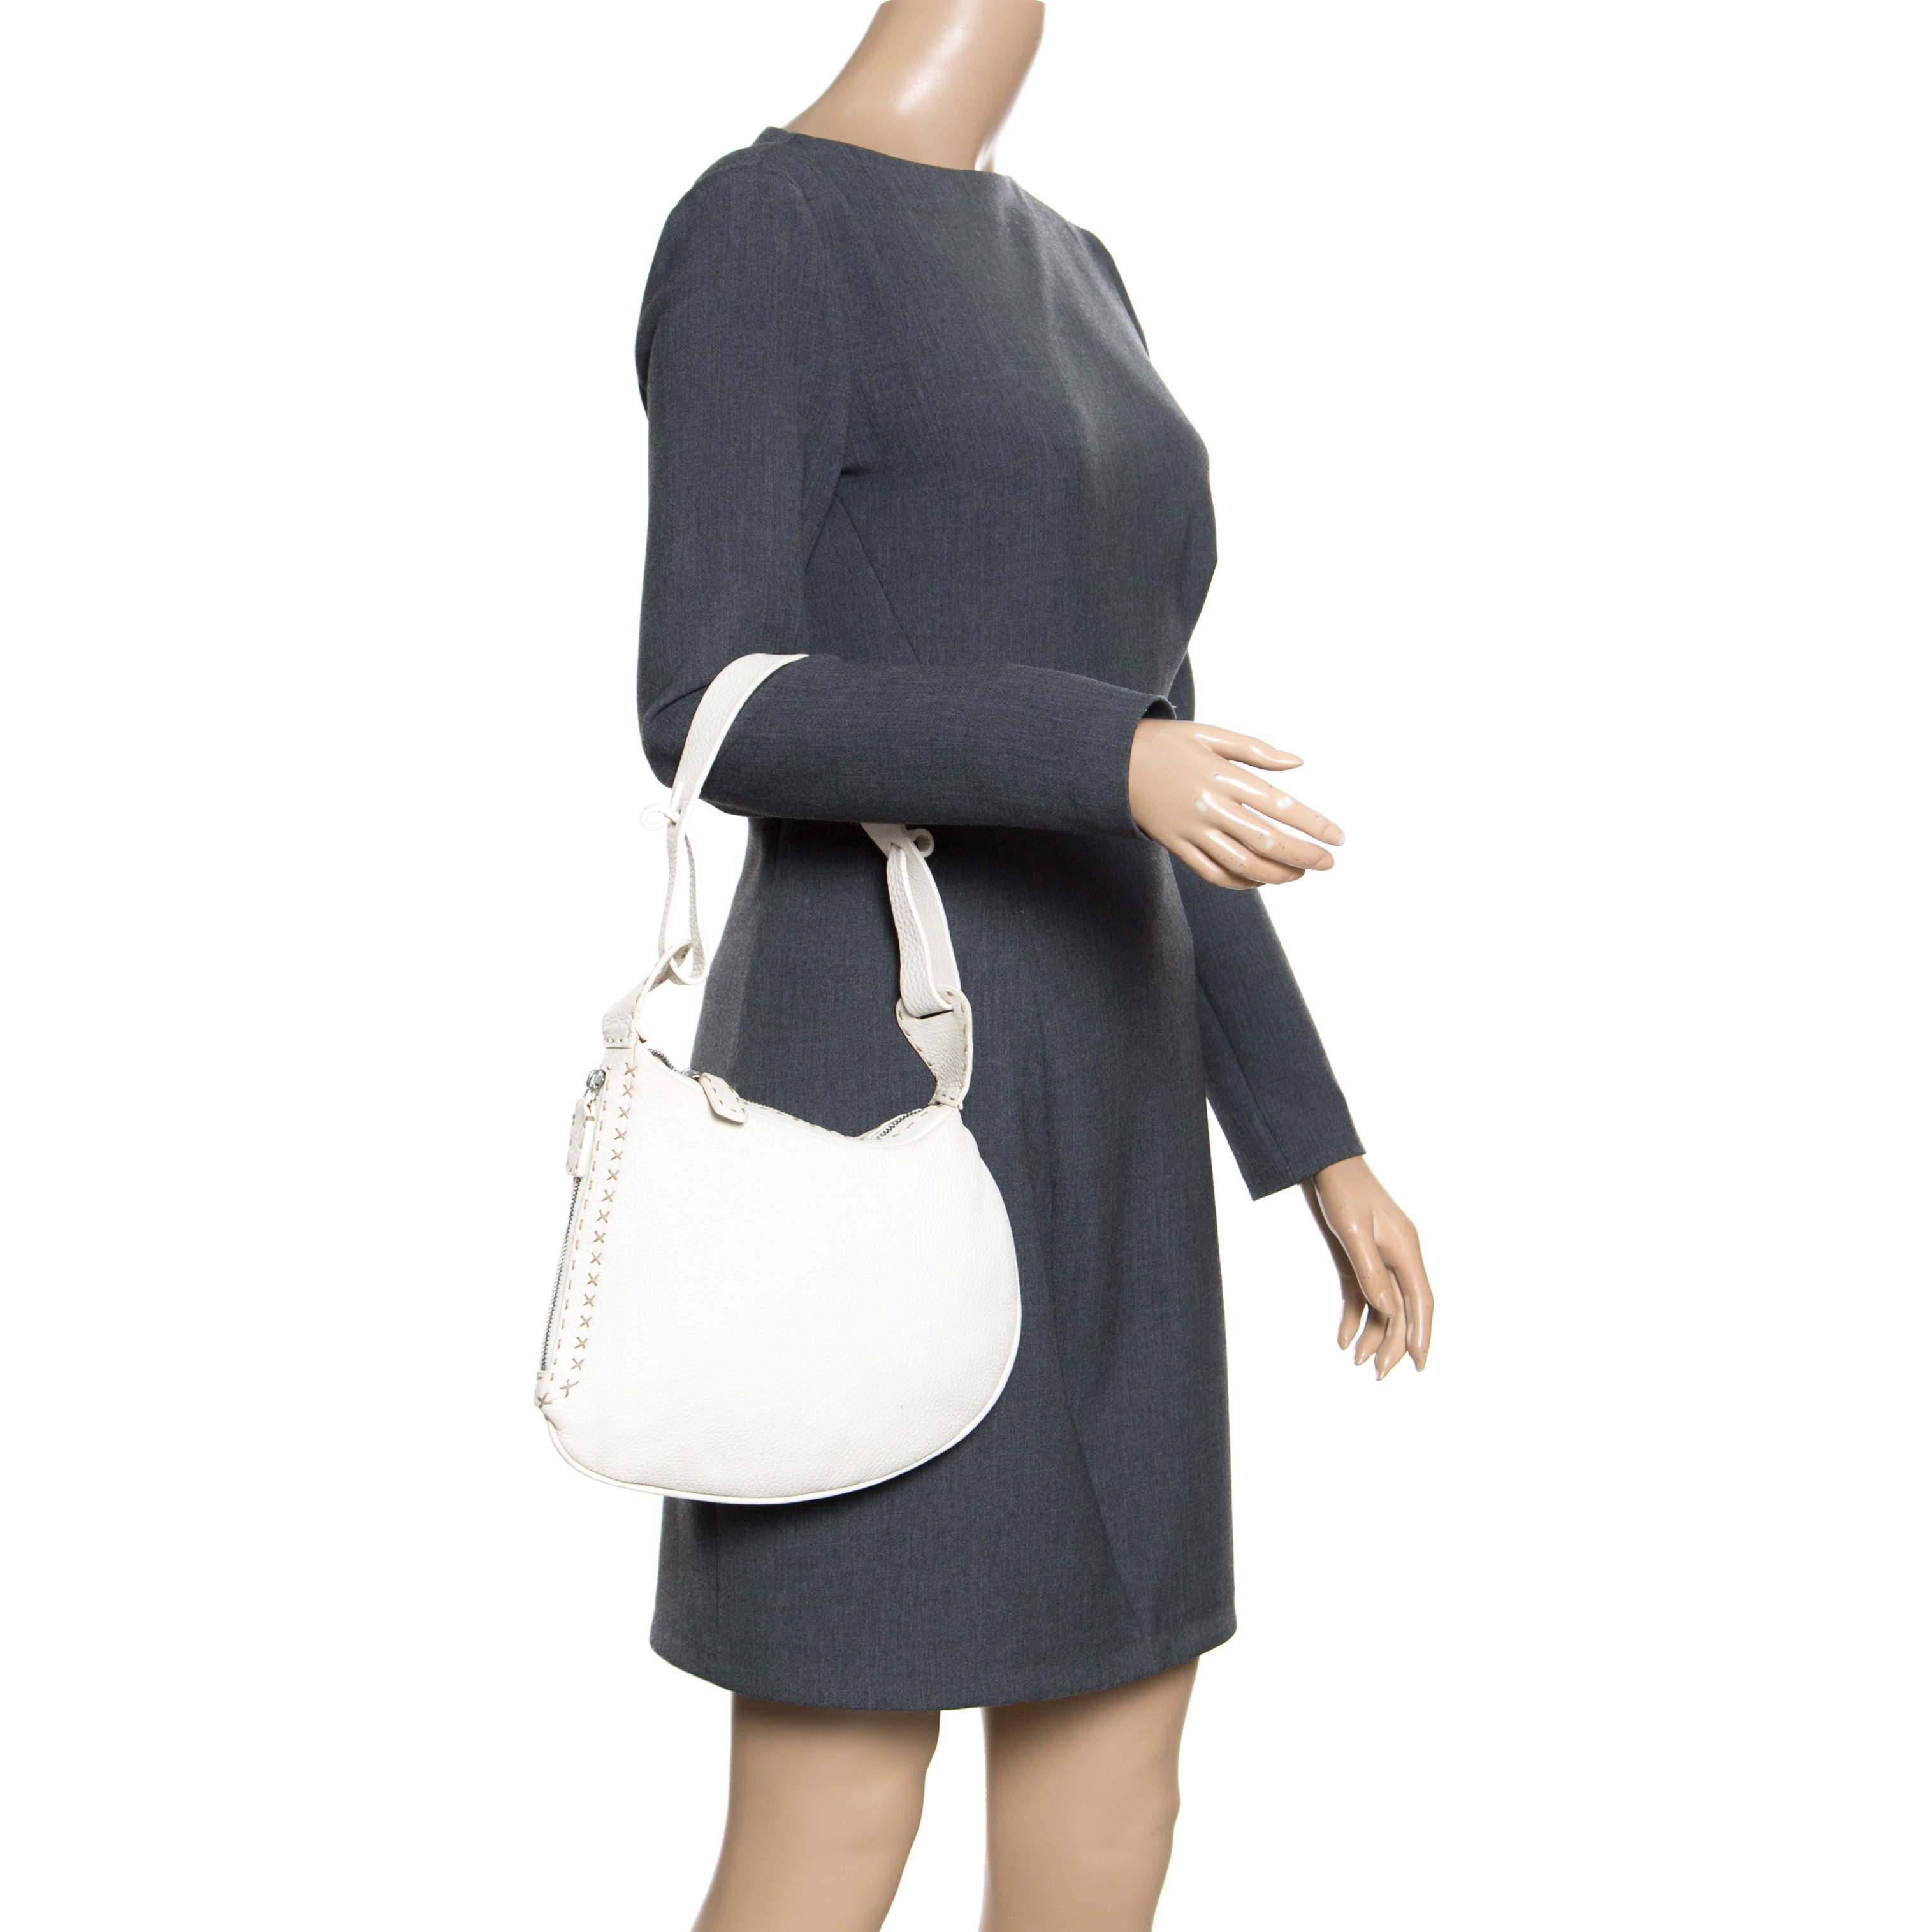 This stylish Oyster hobo is crafted to perfection with pebbled white leather in the shape of an oyster and is adorned with hand-stitched details at the corners. The bag features an end to end shoulder strap and a top zipper closure. The bag opens to